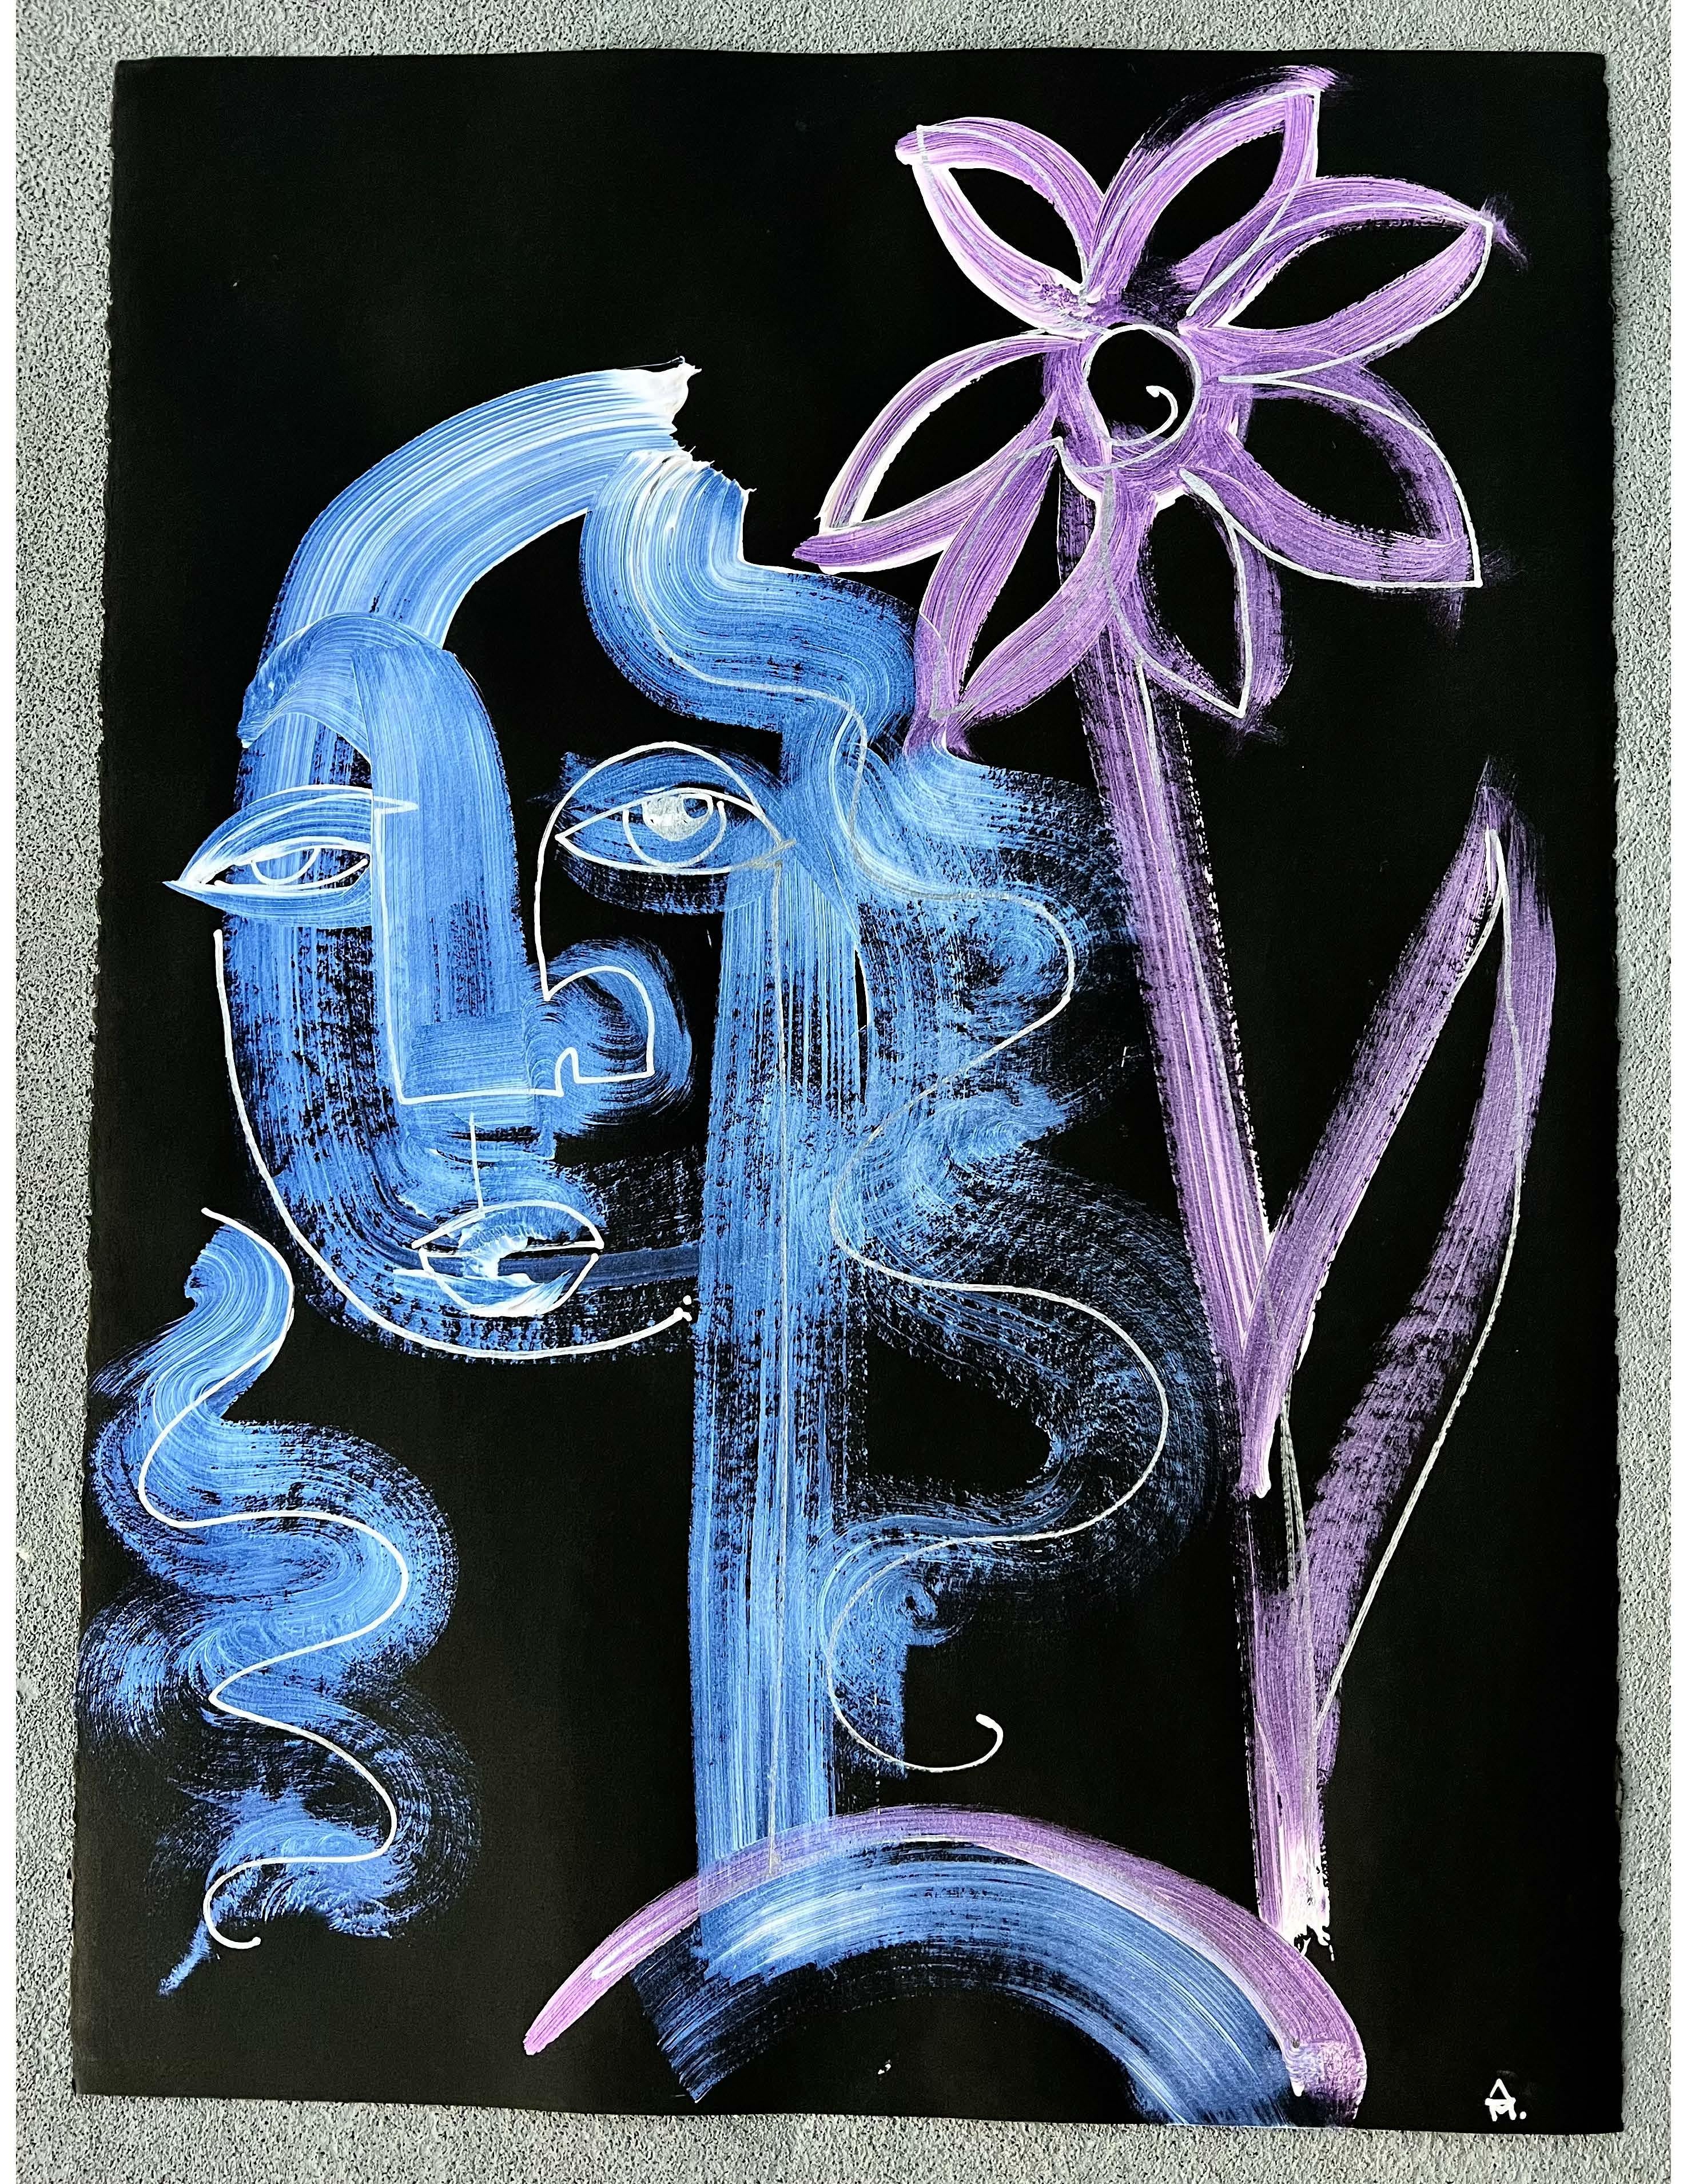 Blue, white and purple portrait of a female figure and flower.  Interference paint makes it really pop in the light.  On black Archival Stonehenge Paper.  Signed by the artist.
